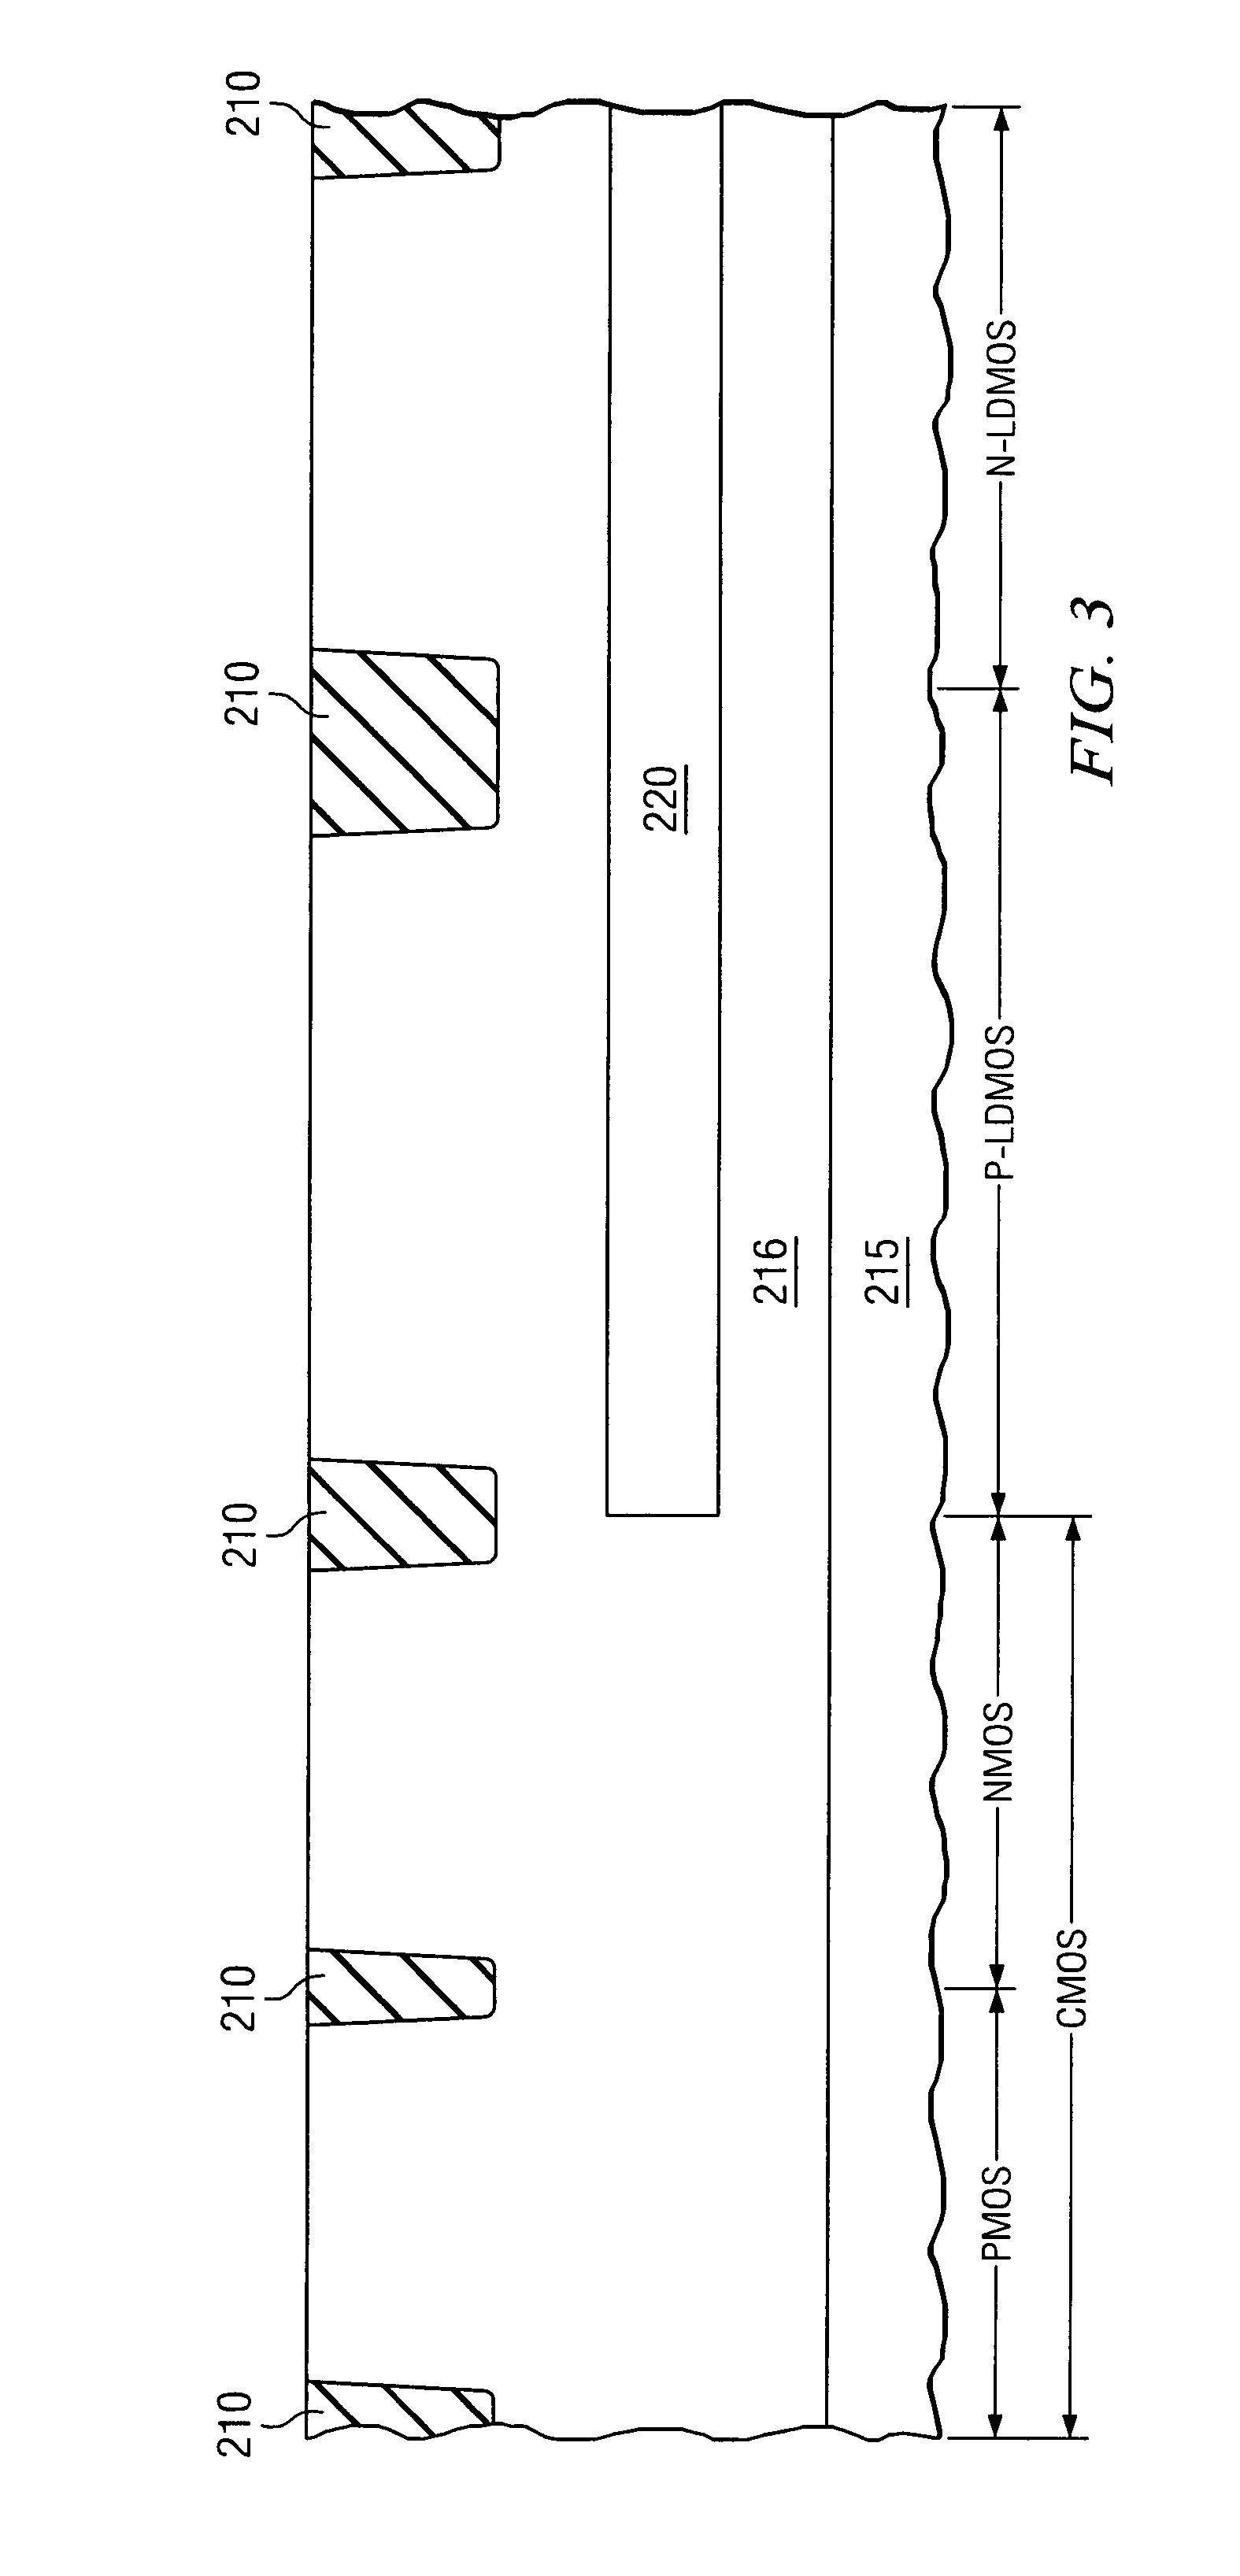 Laterally diffused metal oxide semiconductor device and method of forming the same